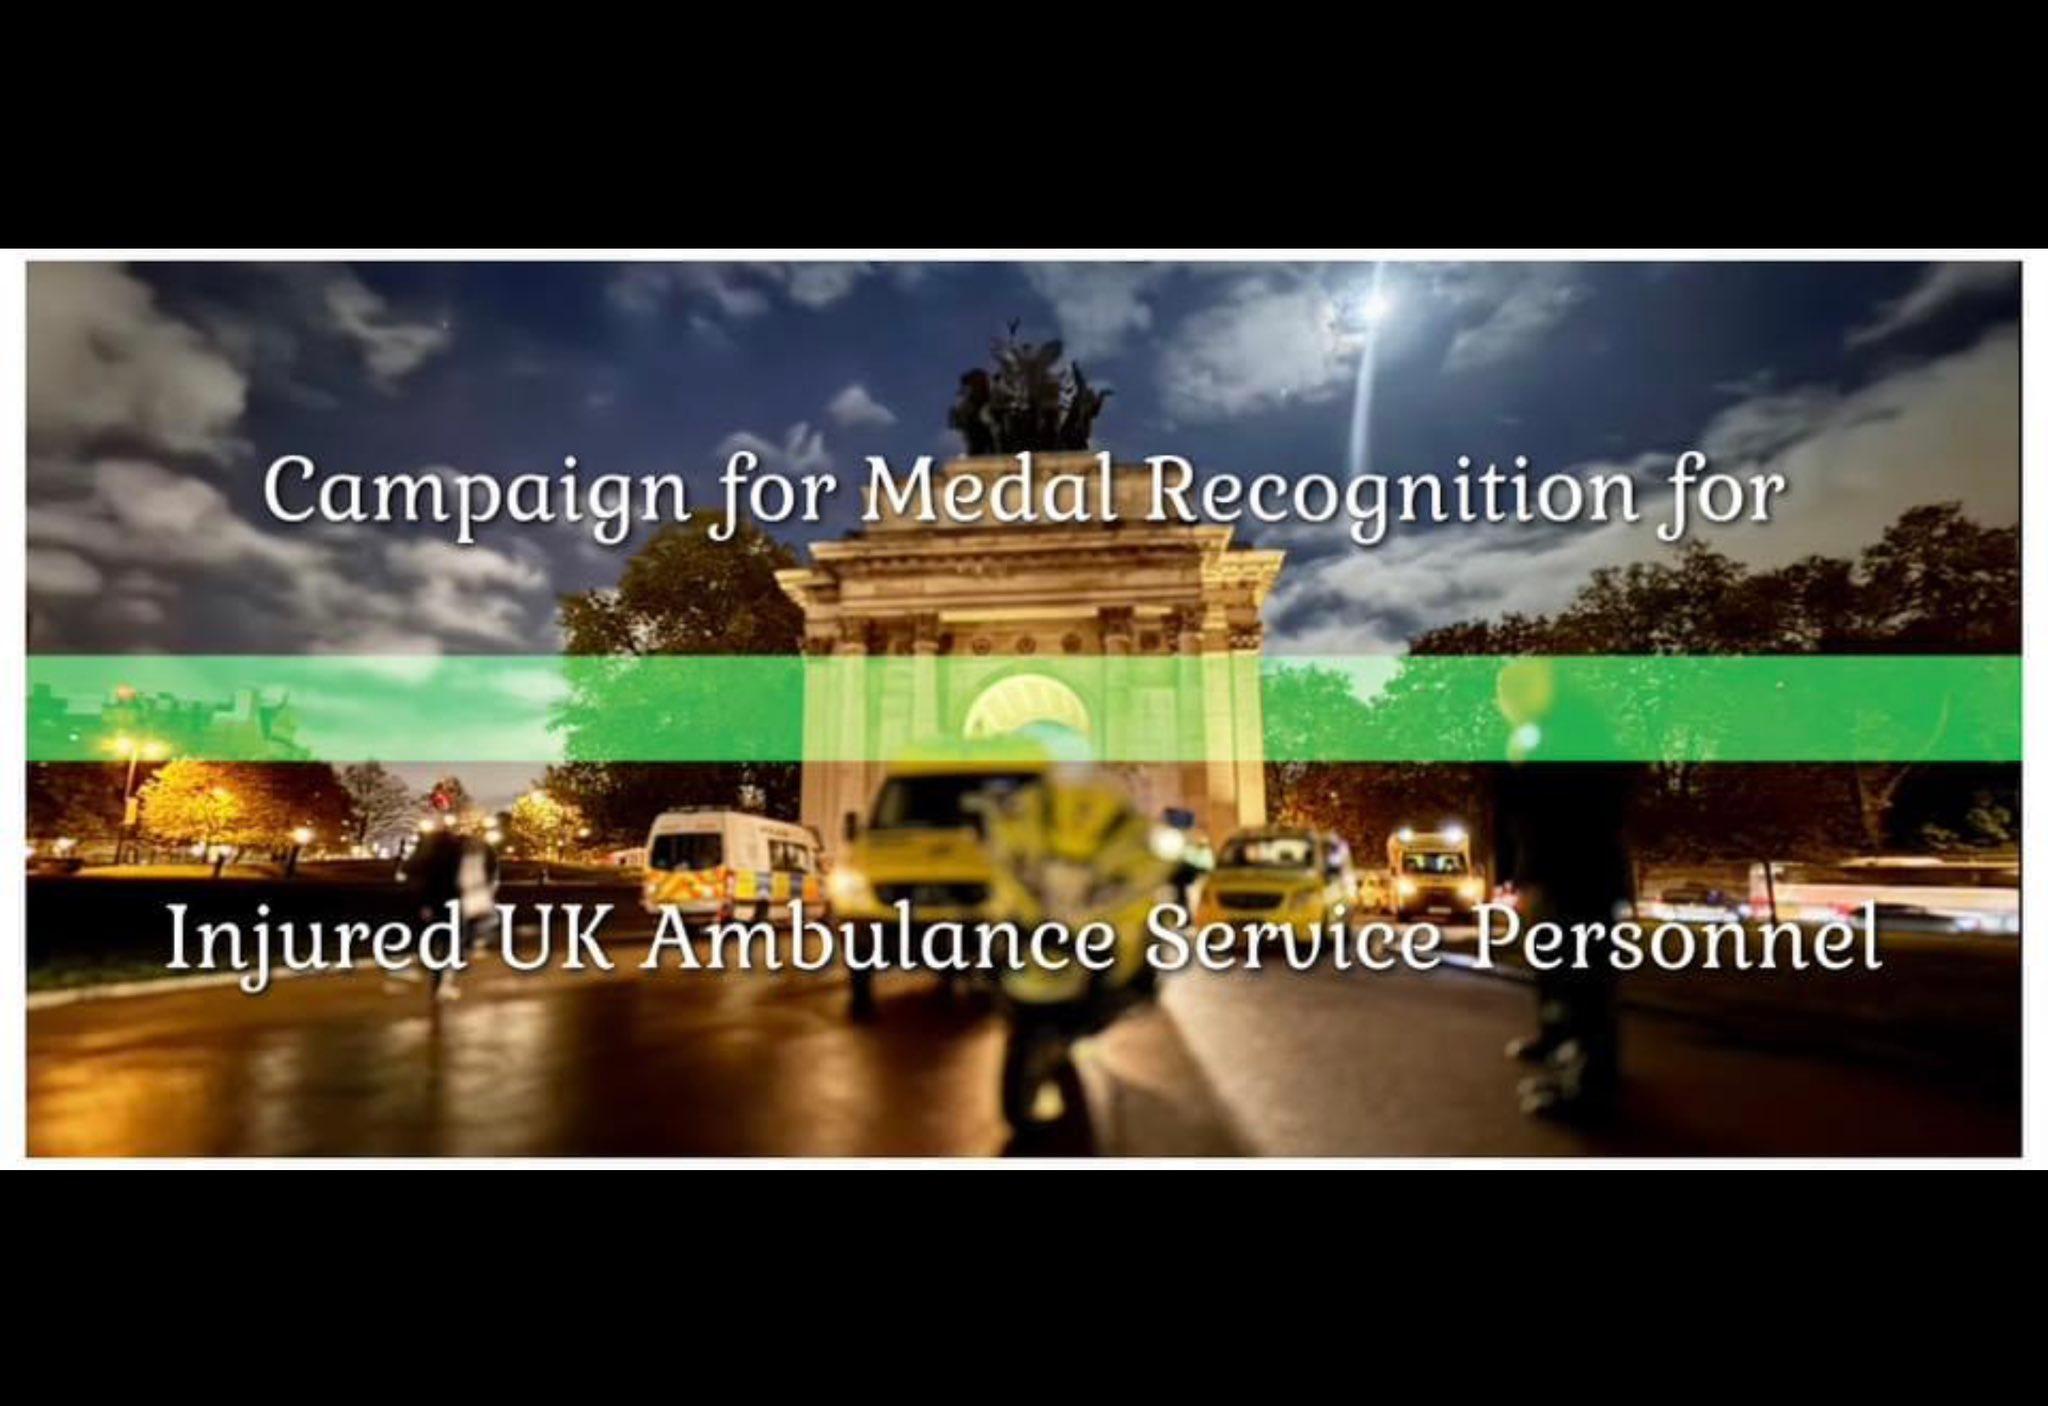 Campaign to recognise injured ambulance service colleagues